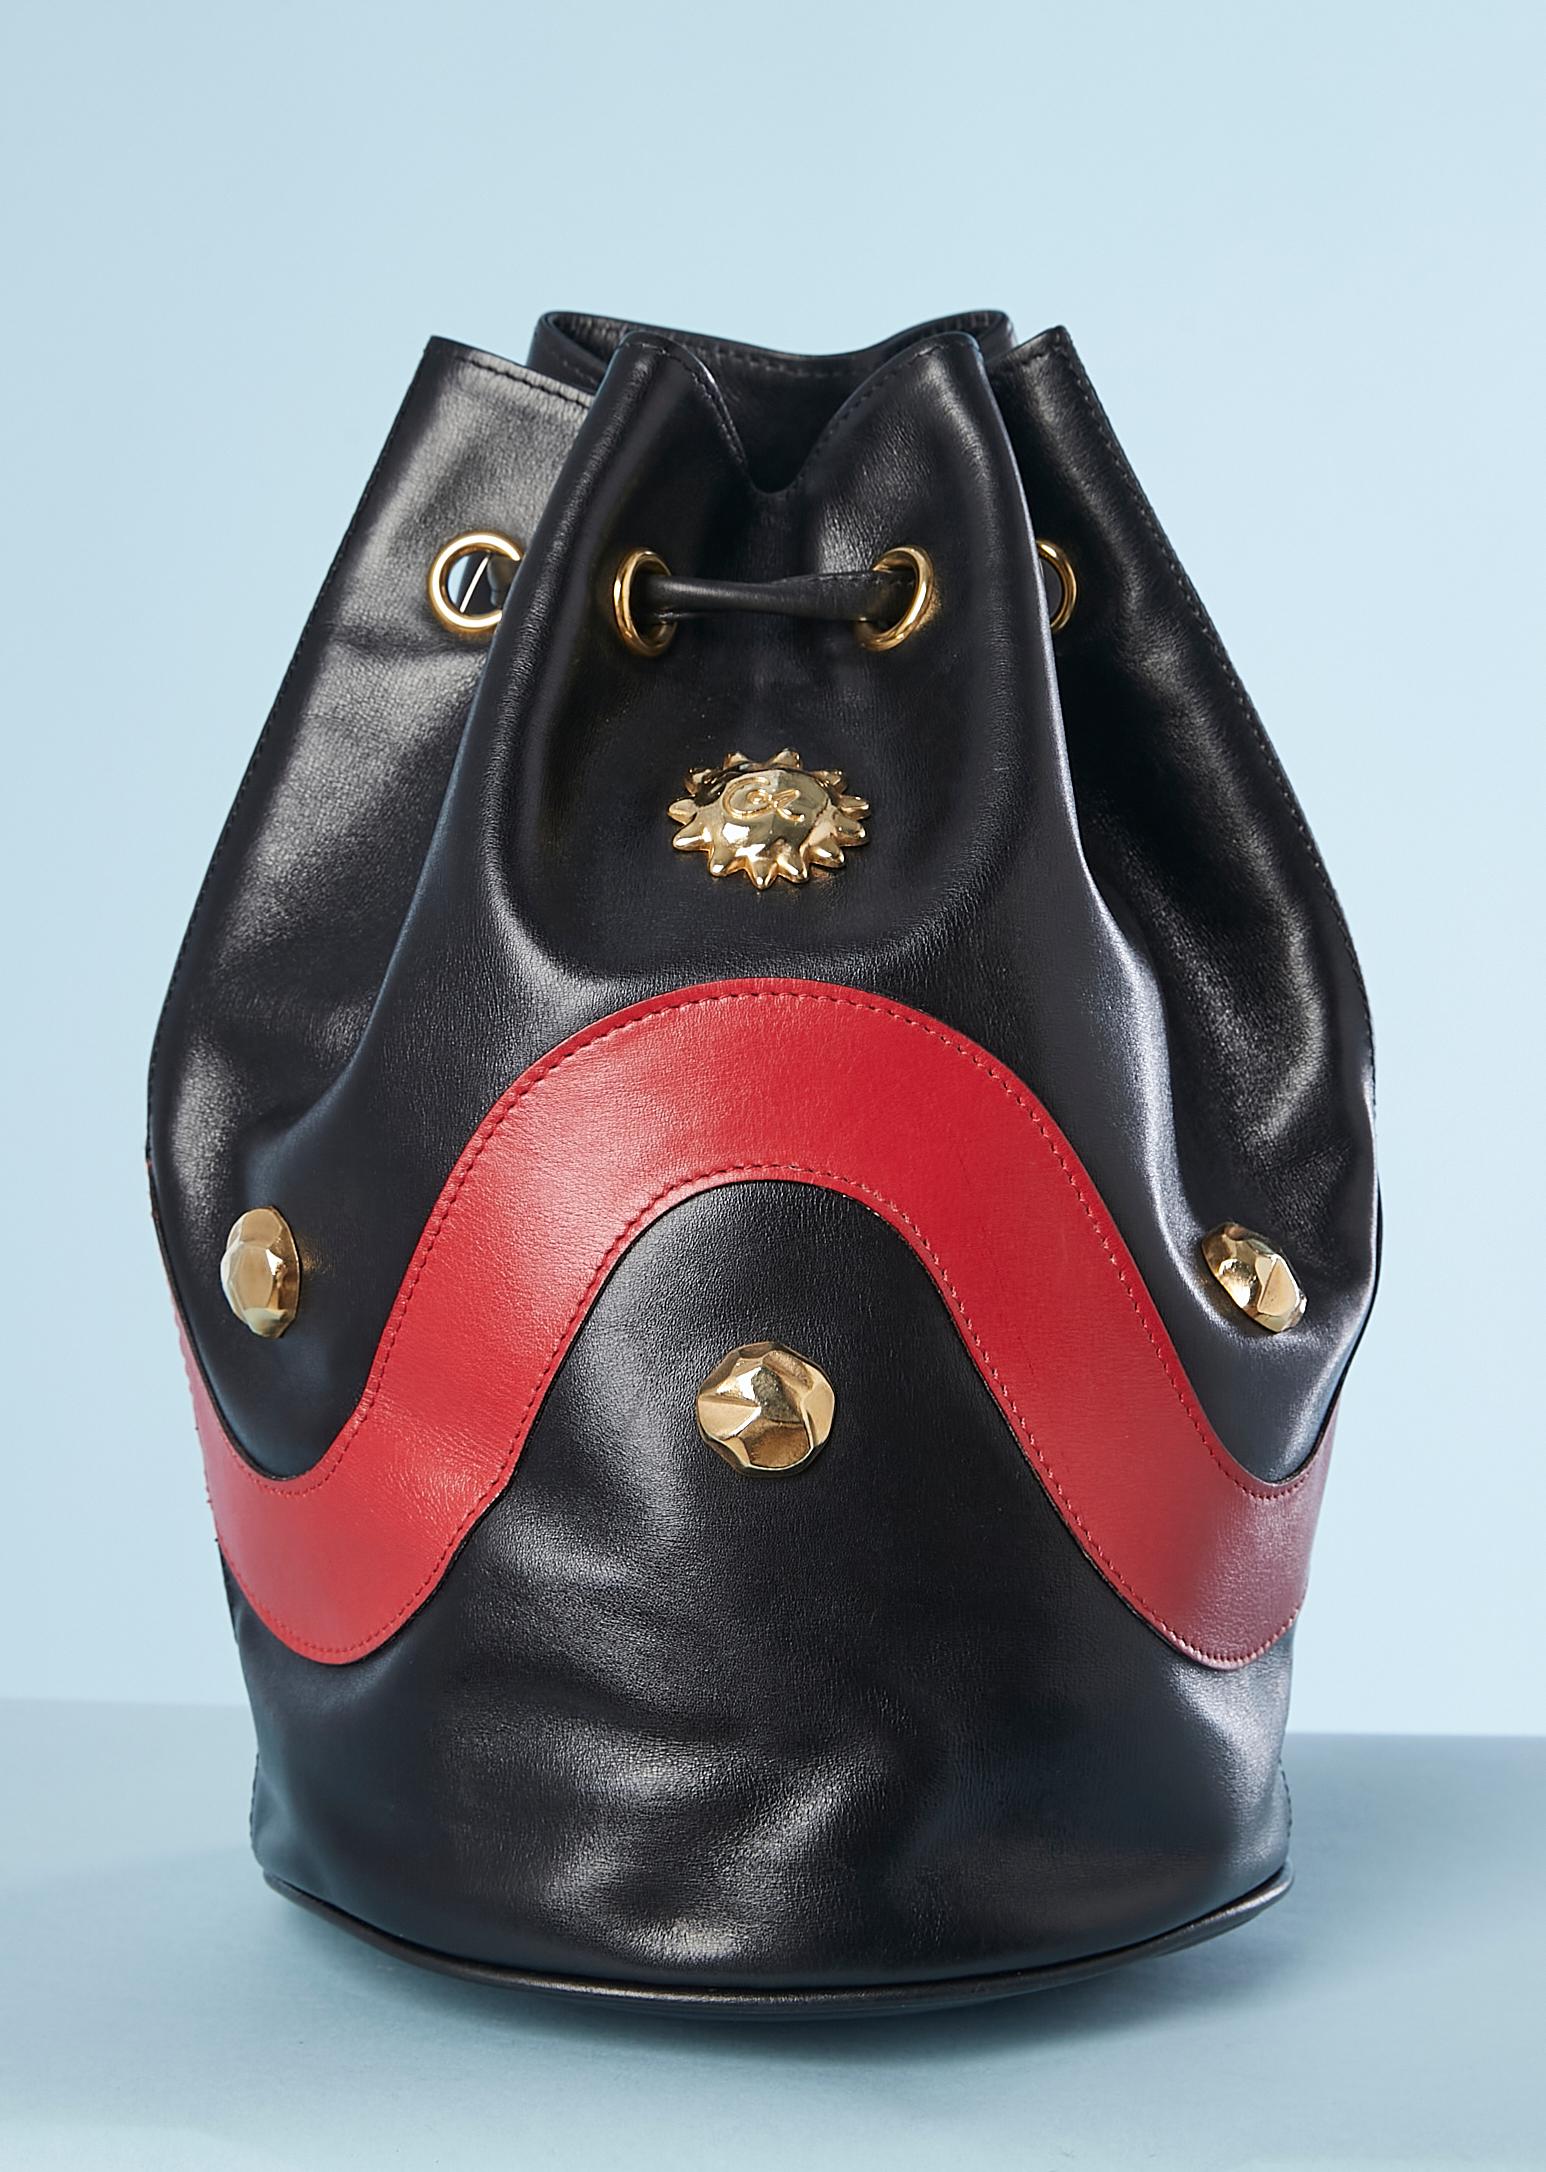 Purse bag in red and black leather with gold metal cabochon embellishement. ONe flat pocket inside. Silky gros-grain lining.
Dust-bag provide